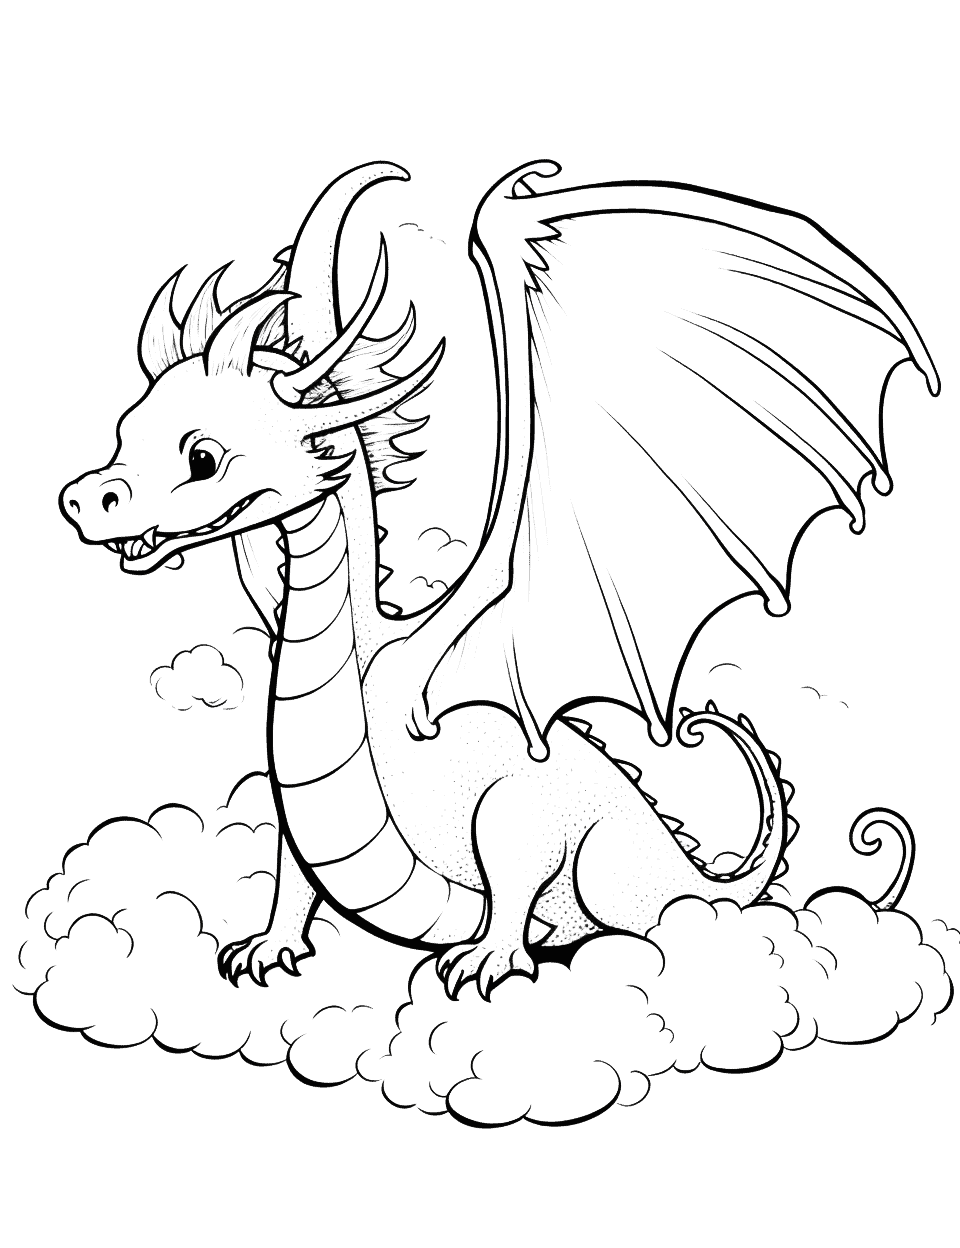 Dragon in the Clouds Coloring Page - A dragon hiding in the fluffy clouds.